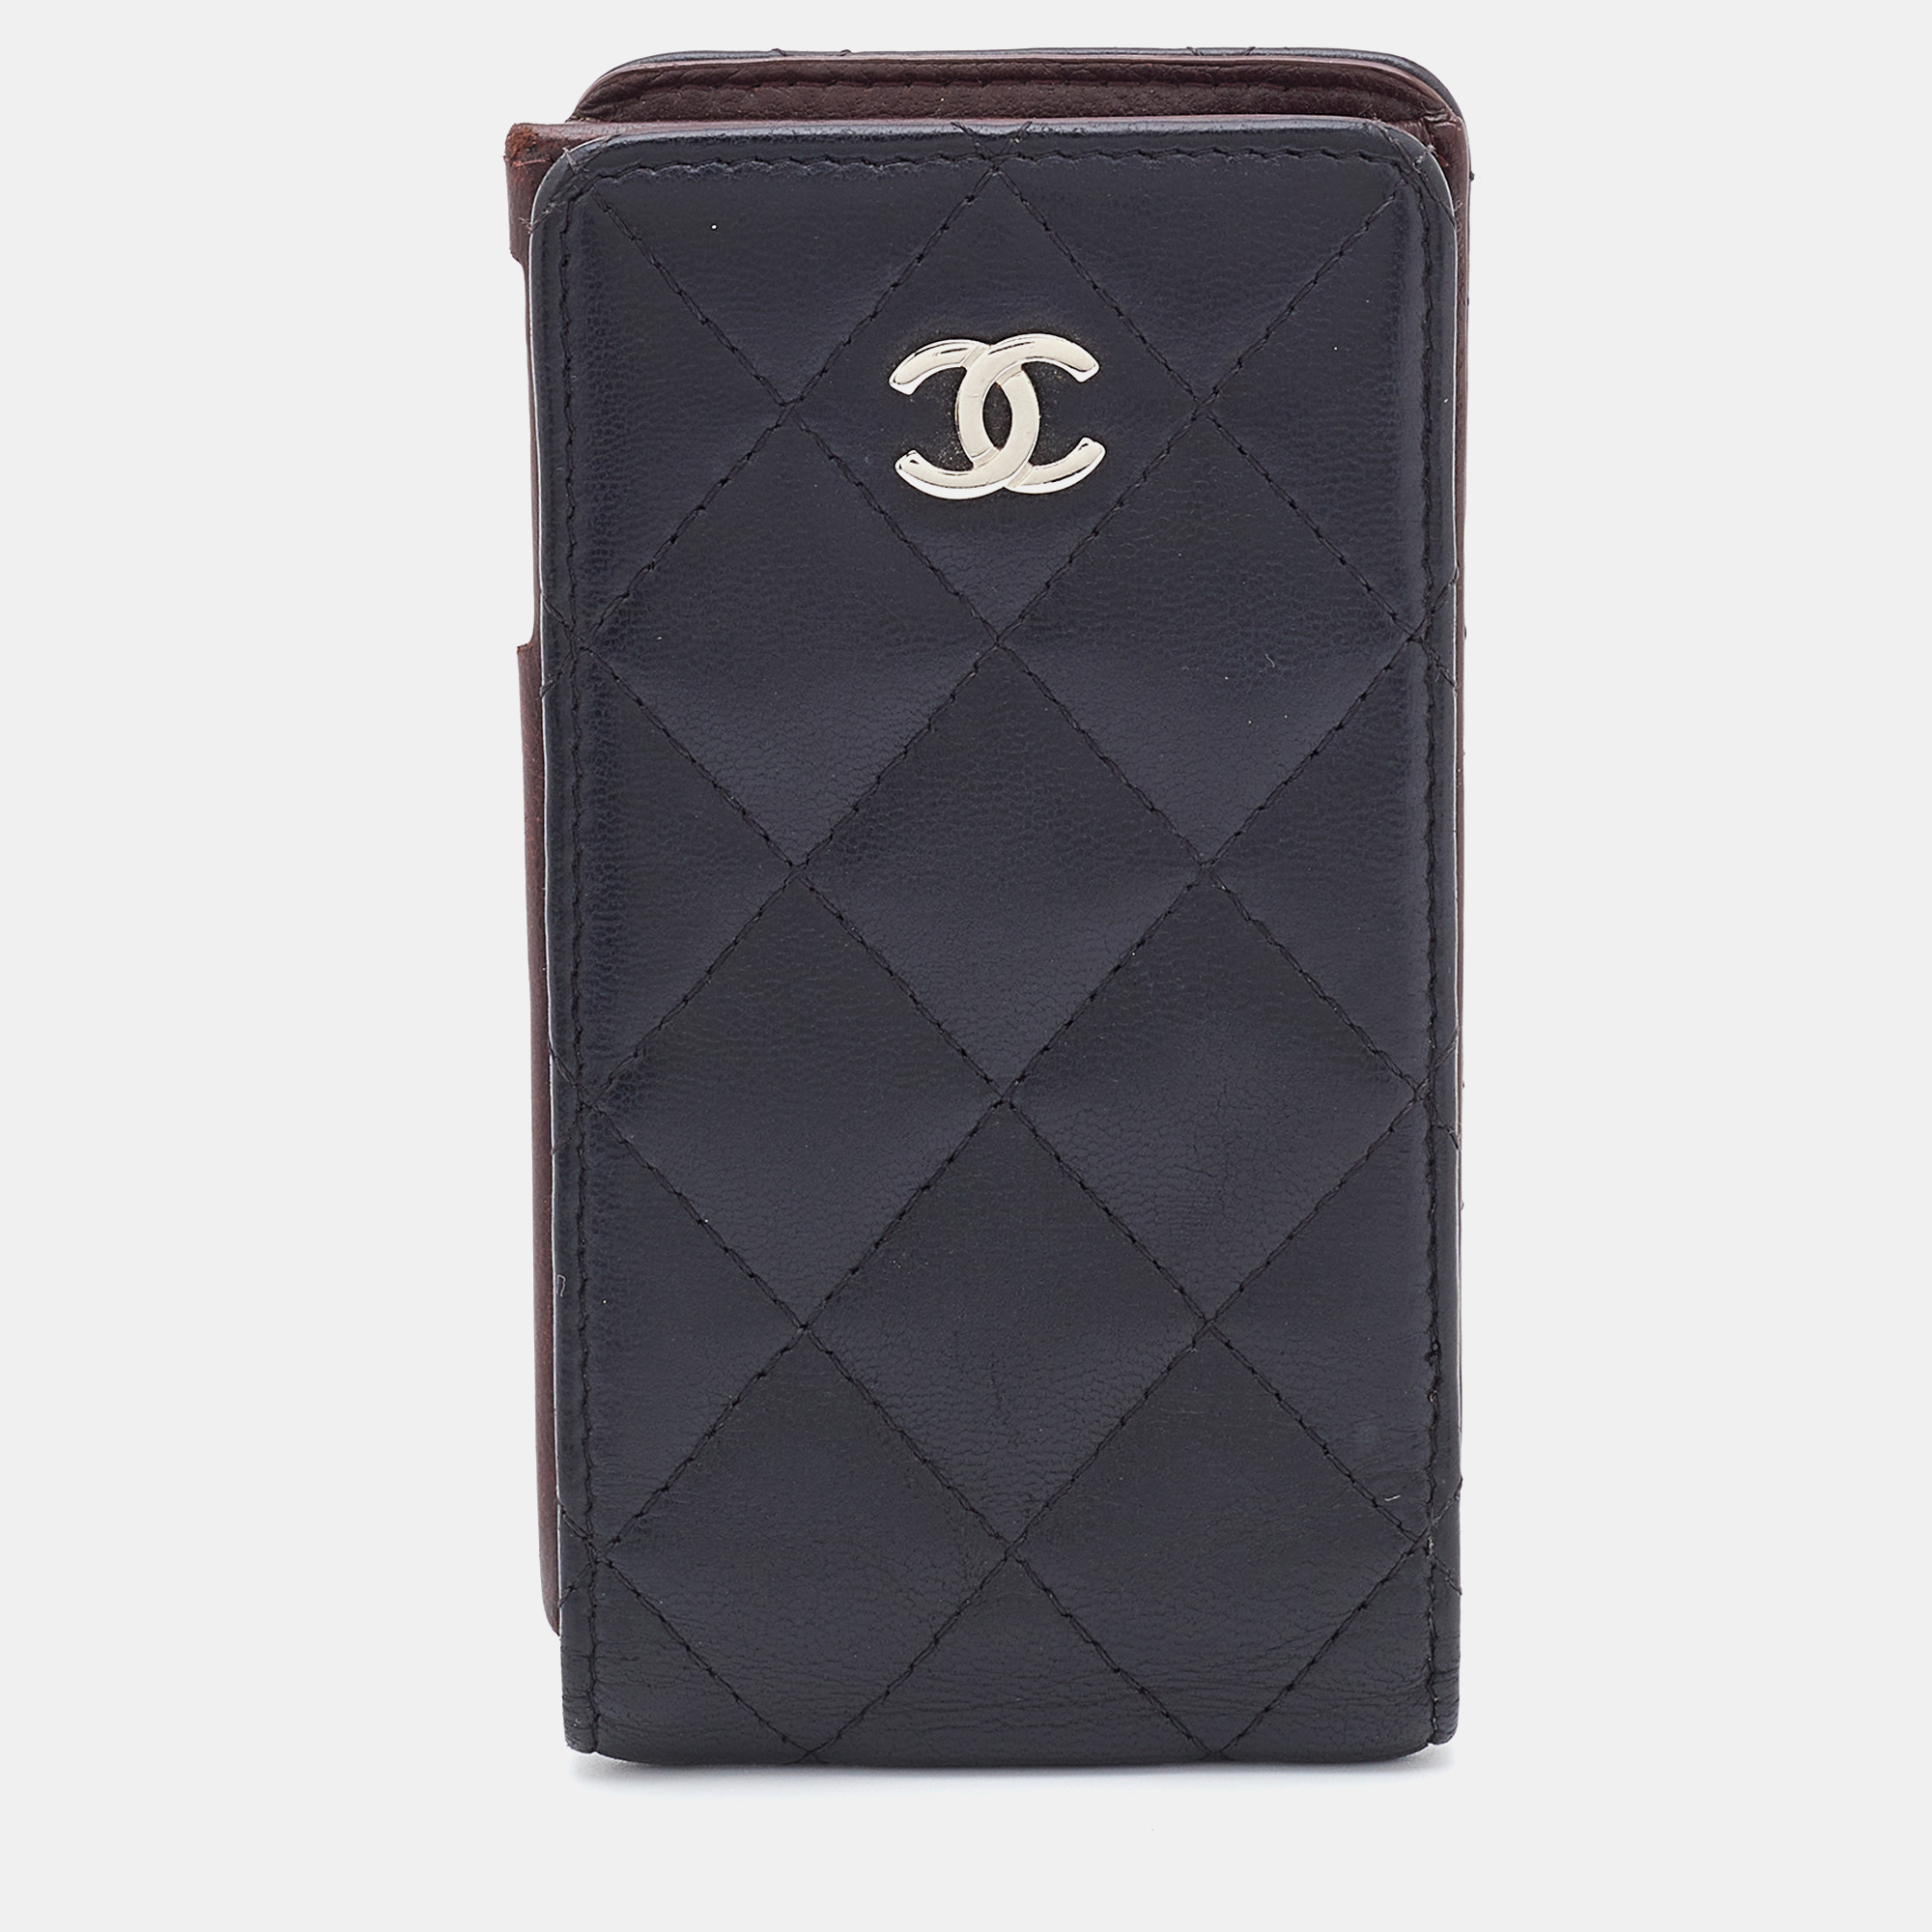 Pre-owned Chanel Black Quilted Leather Cc Iphone4/5 Case